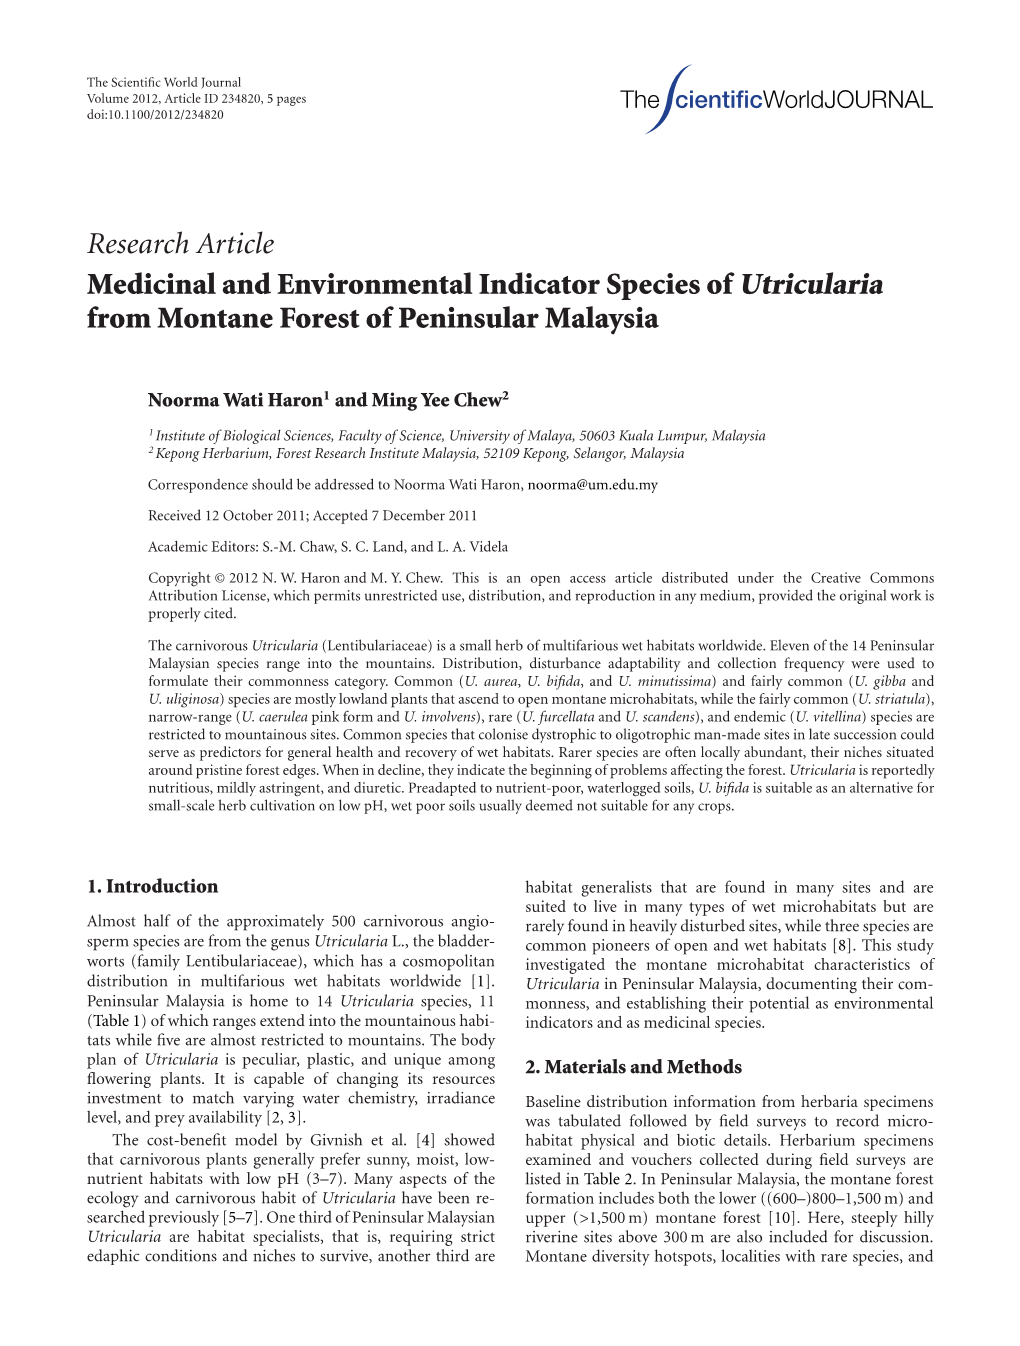 Research Article Medicinal and Environmental Indicator Species of Utricularia from Montane Forest of Peninsular Malaysia